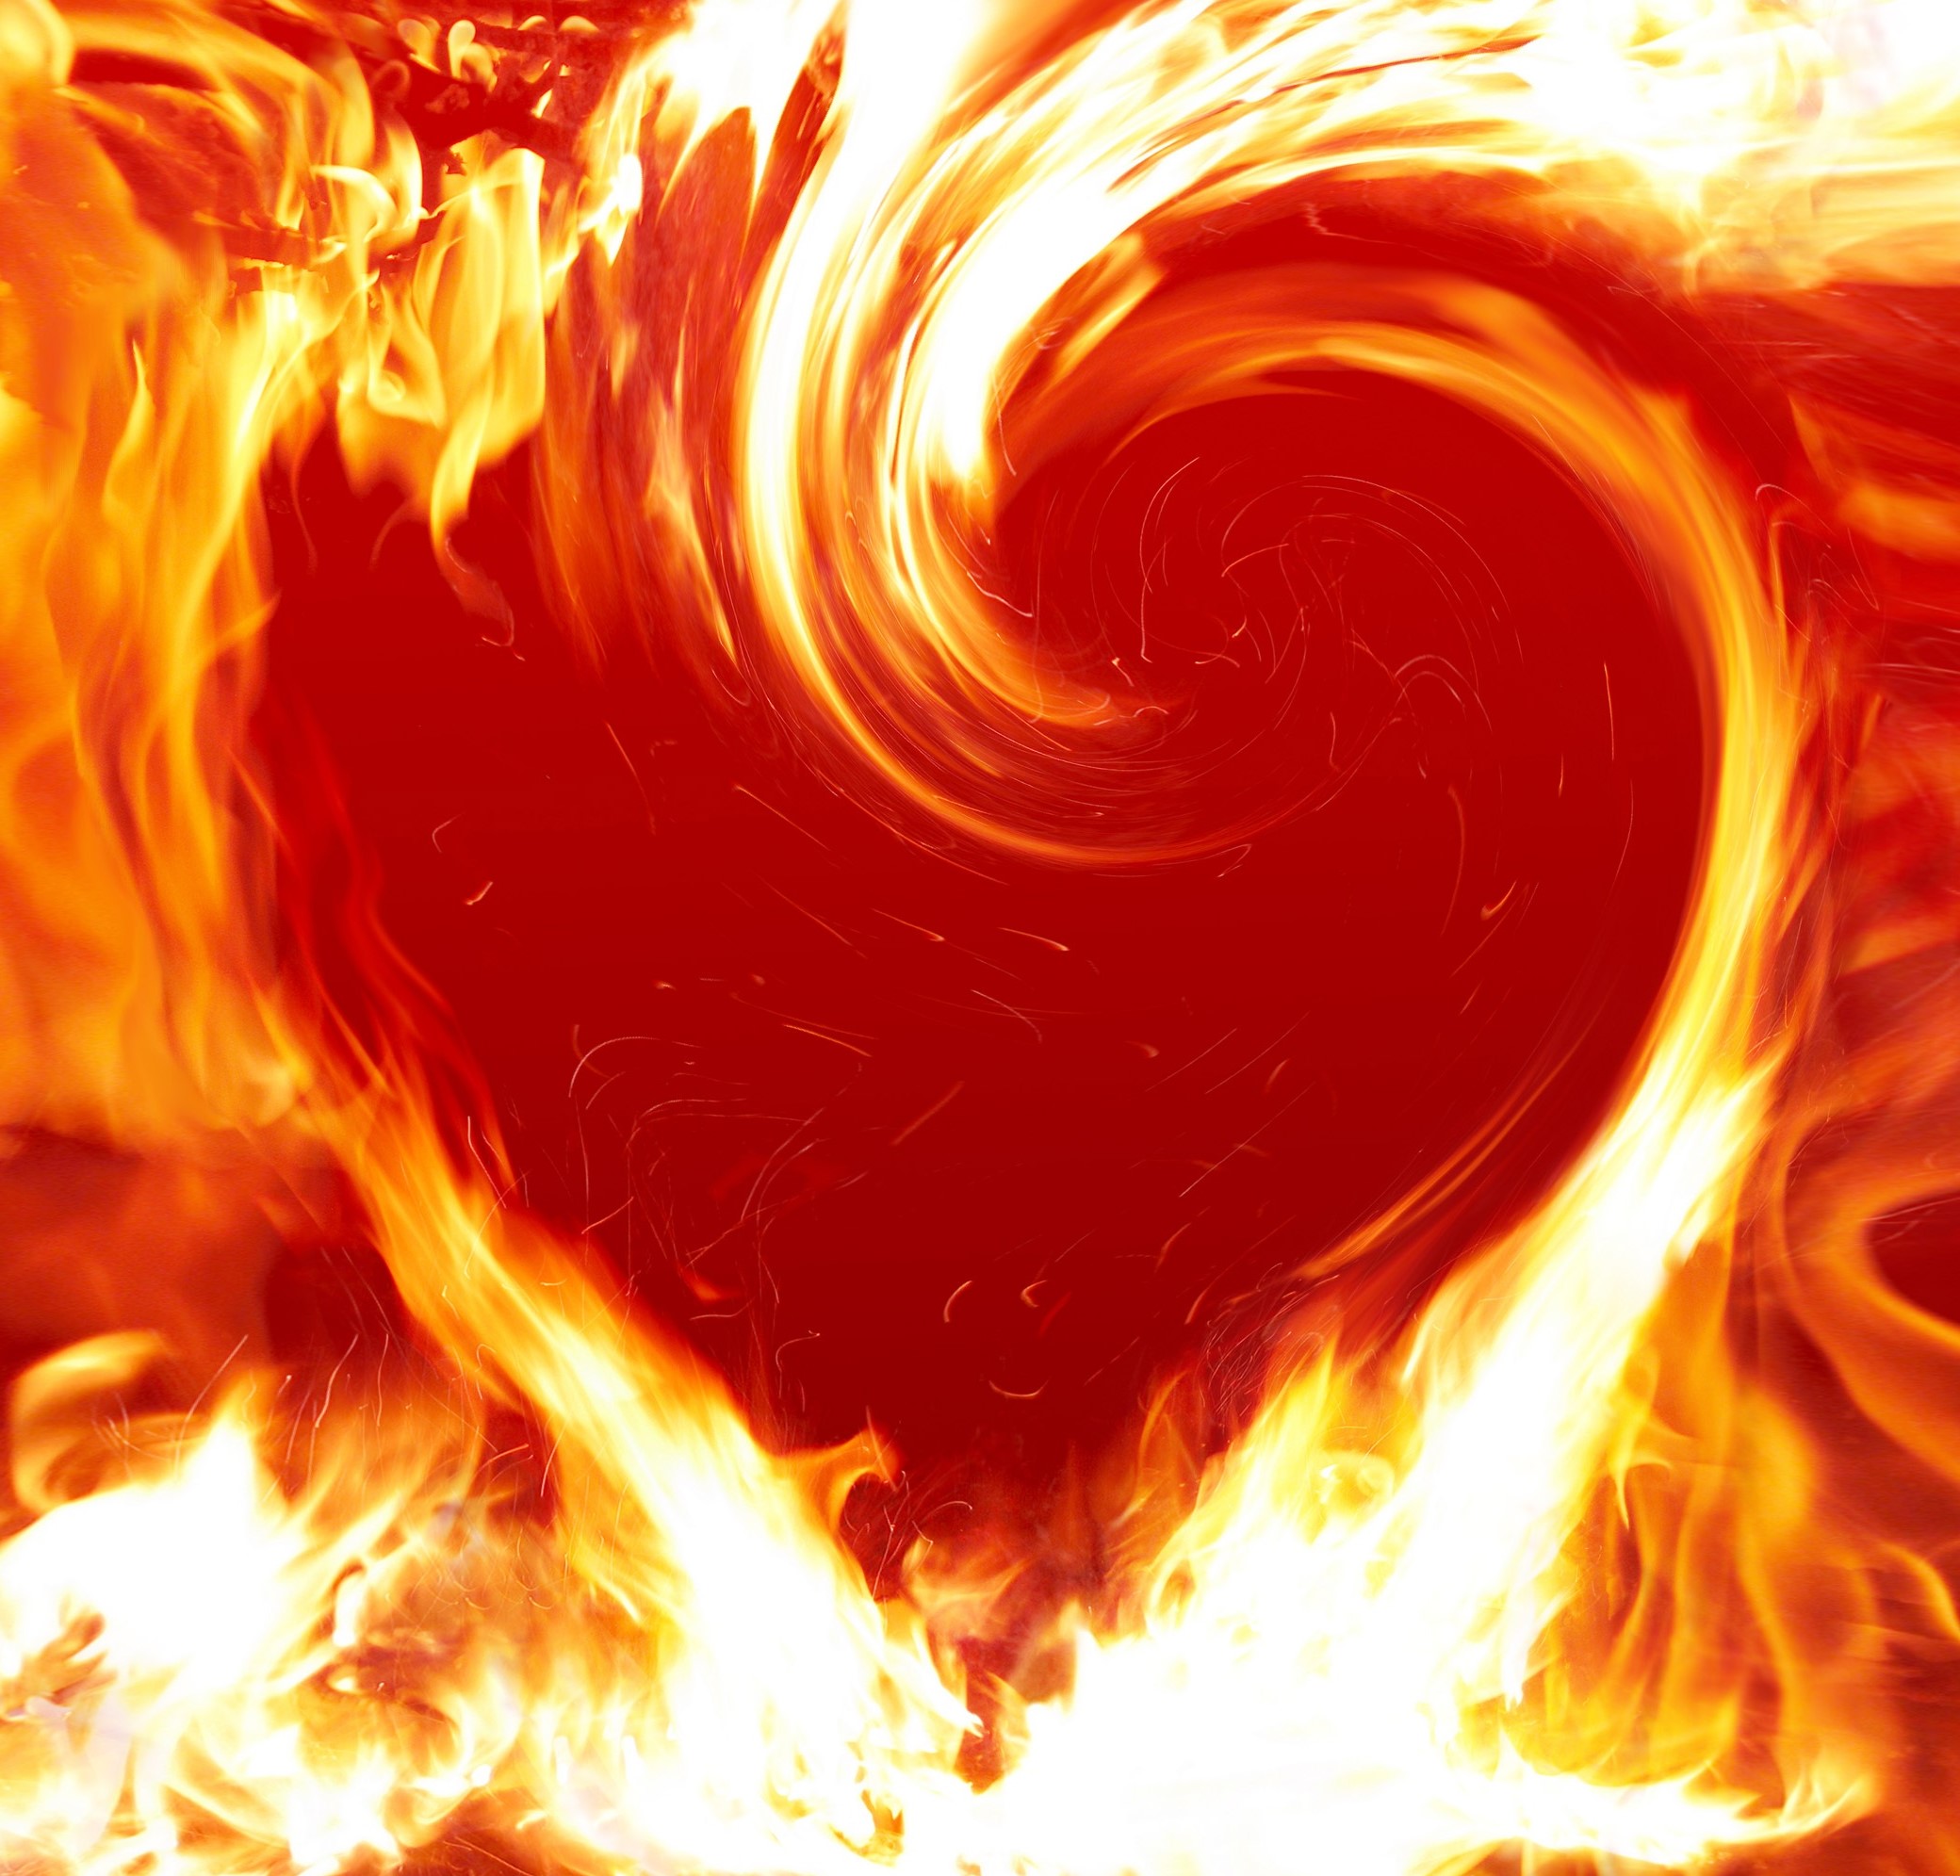 flaming red heart abstract with white and yellow flames forming the outline of a heart